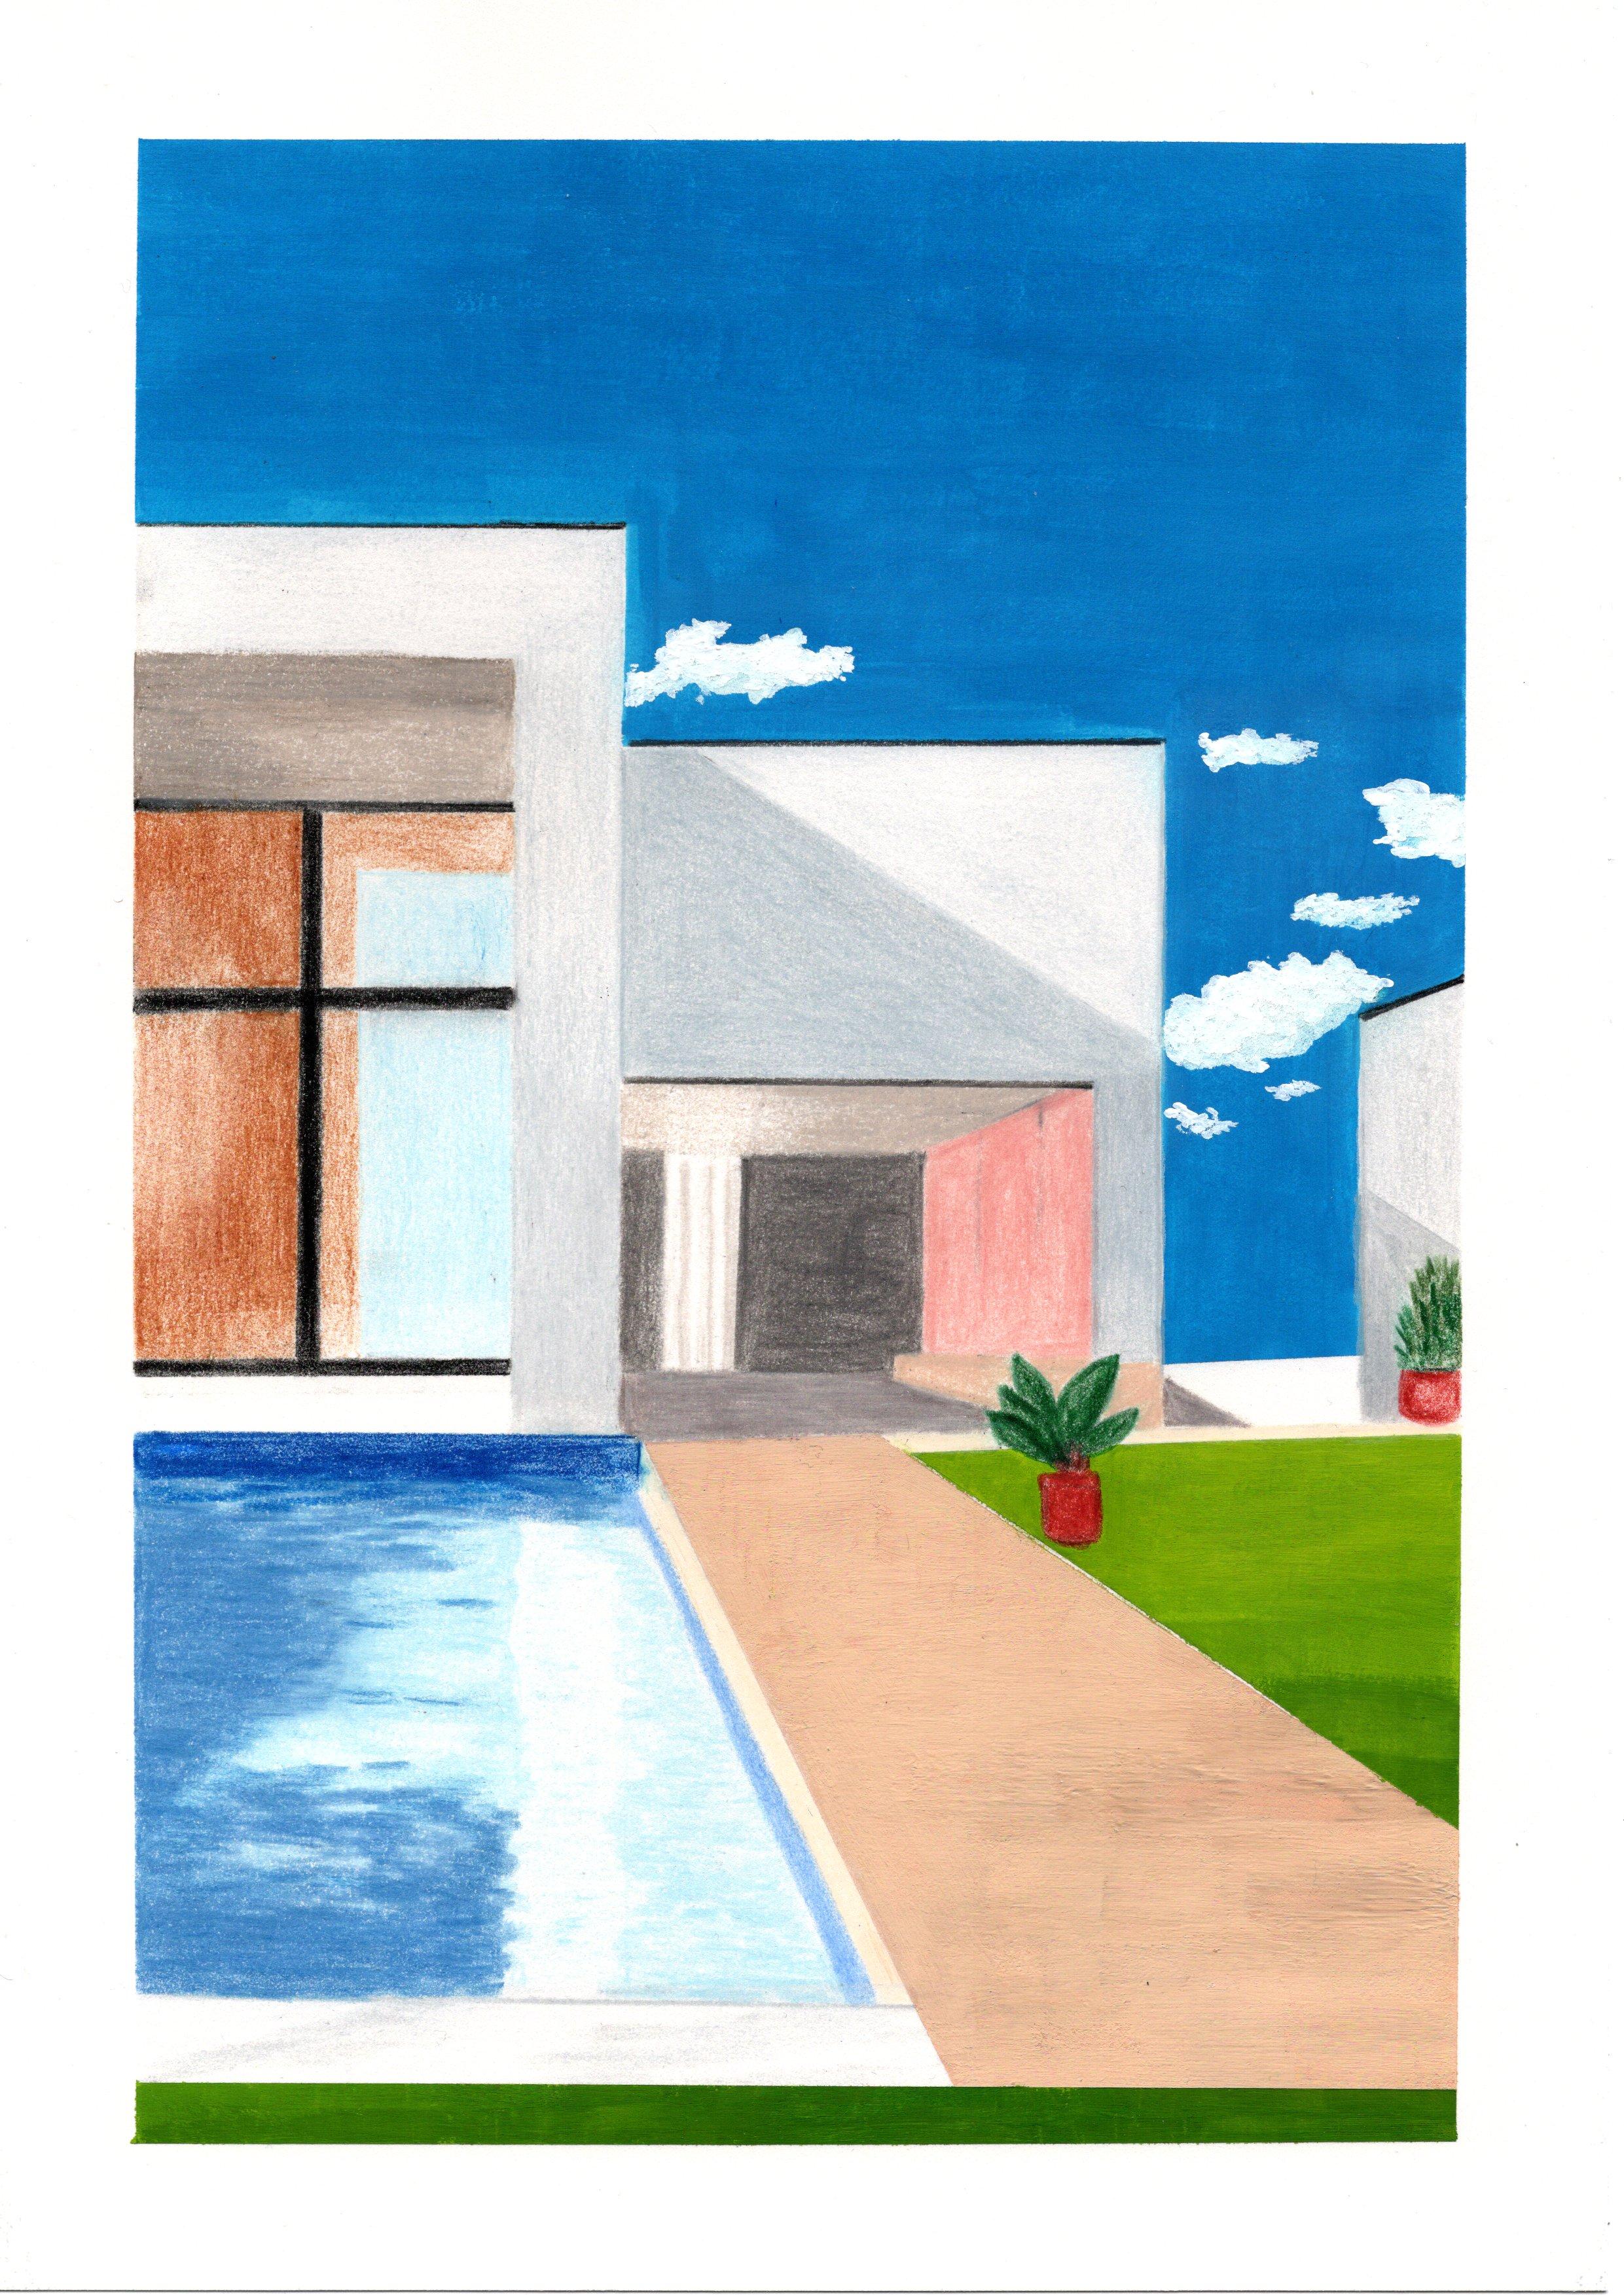 On the Roof, Original Drawing, Gouache, Pool, Contemporary Landscape, Sky